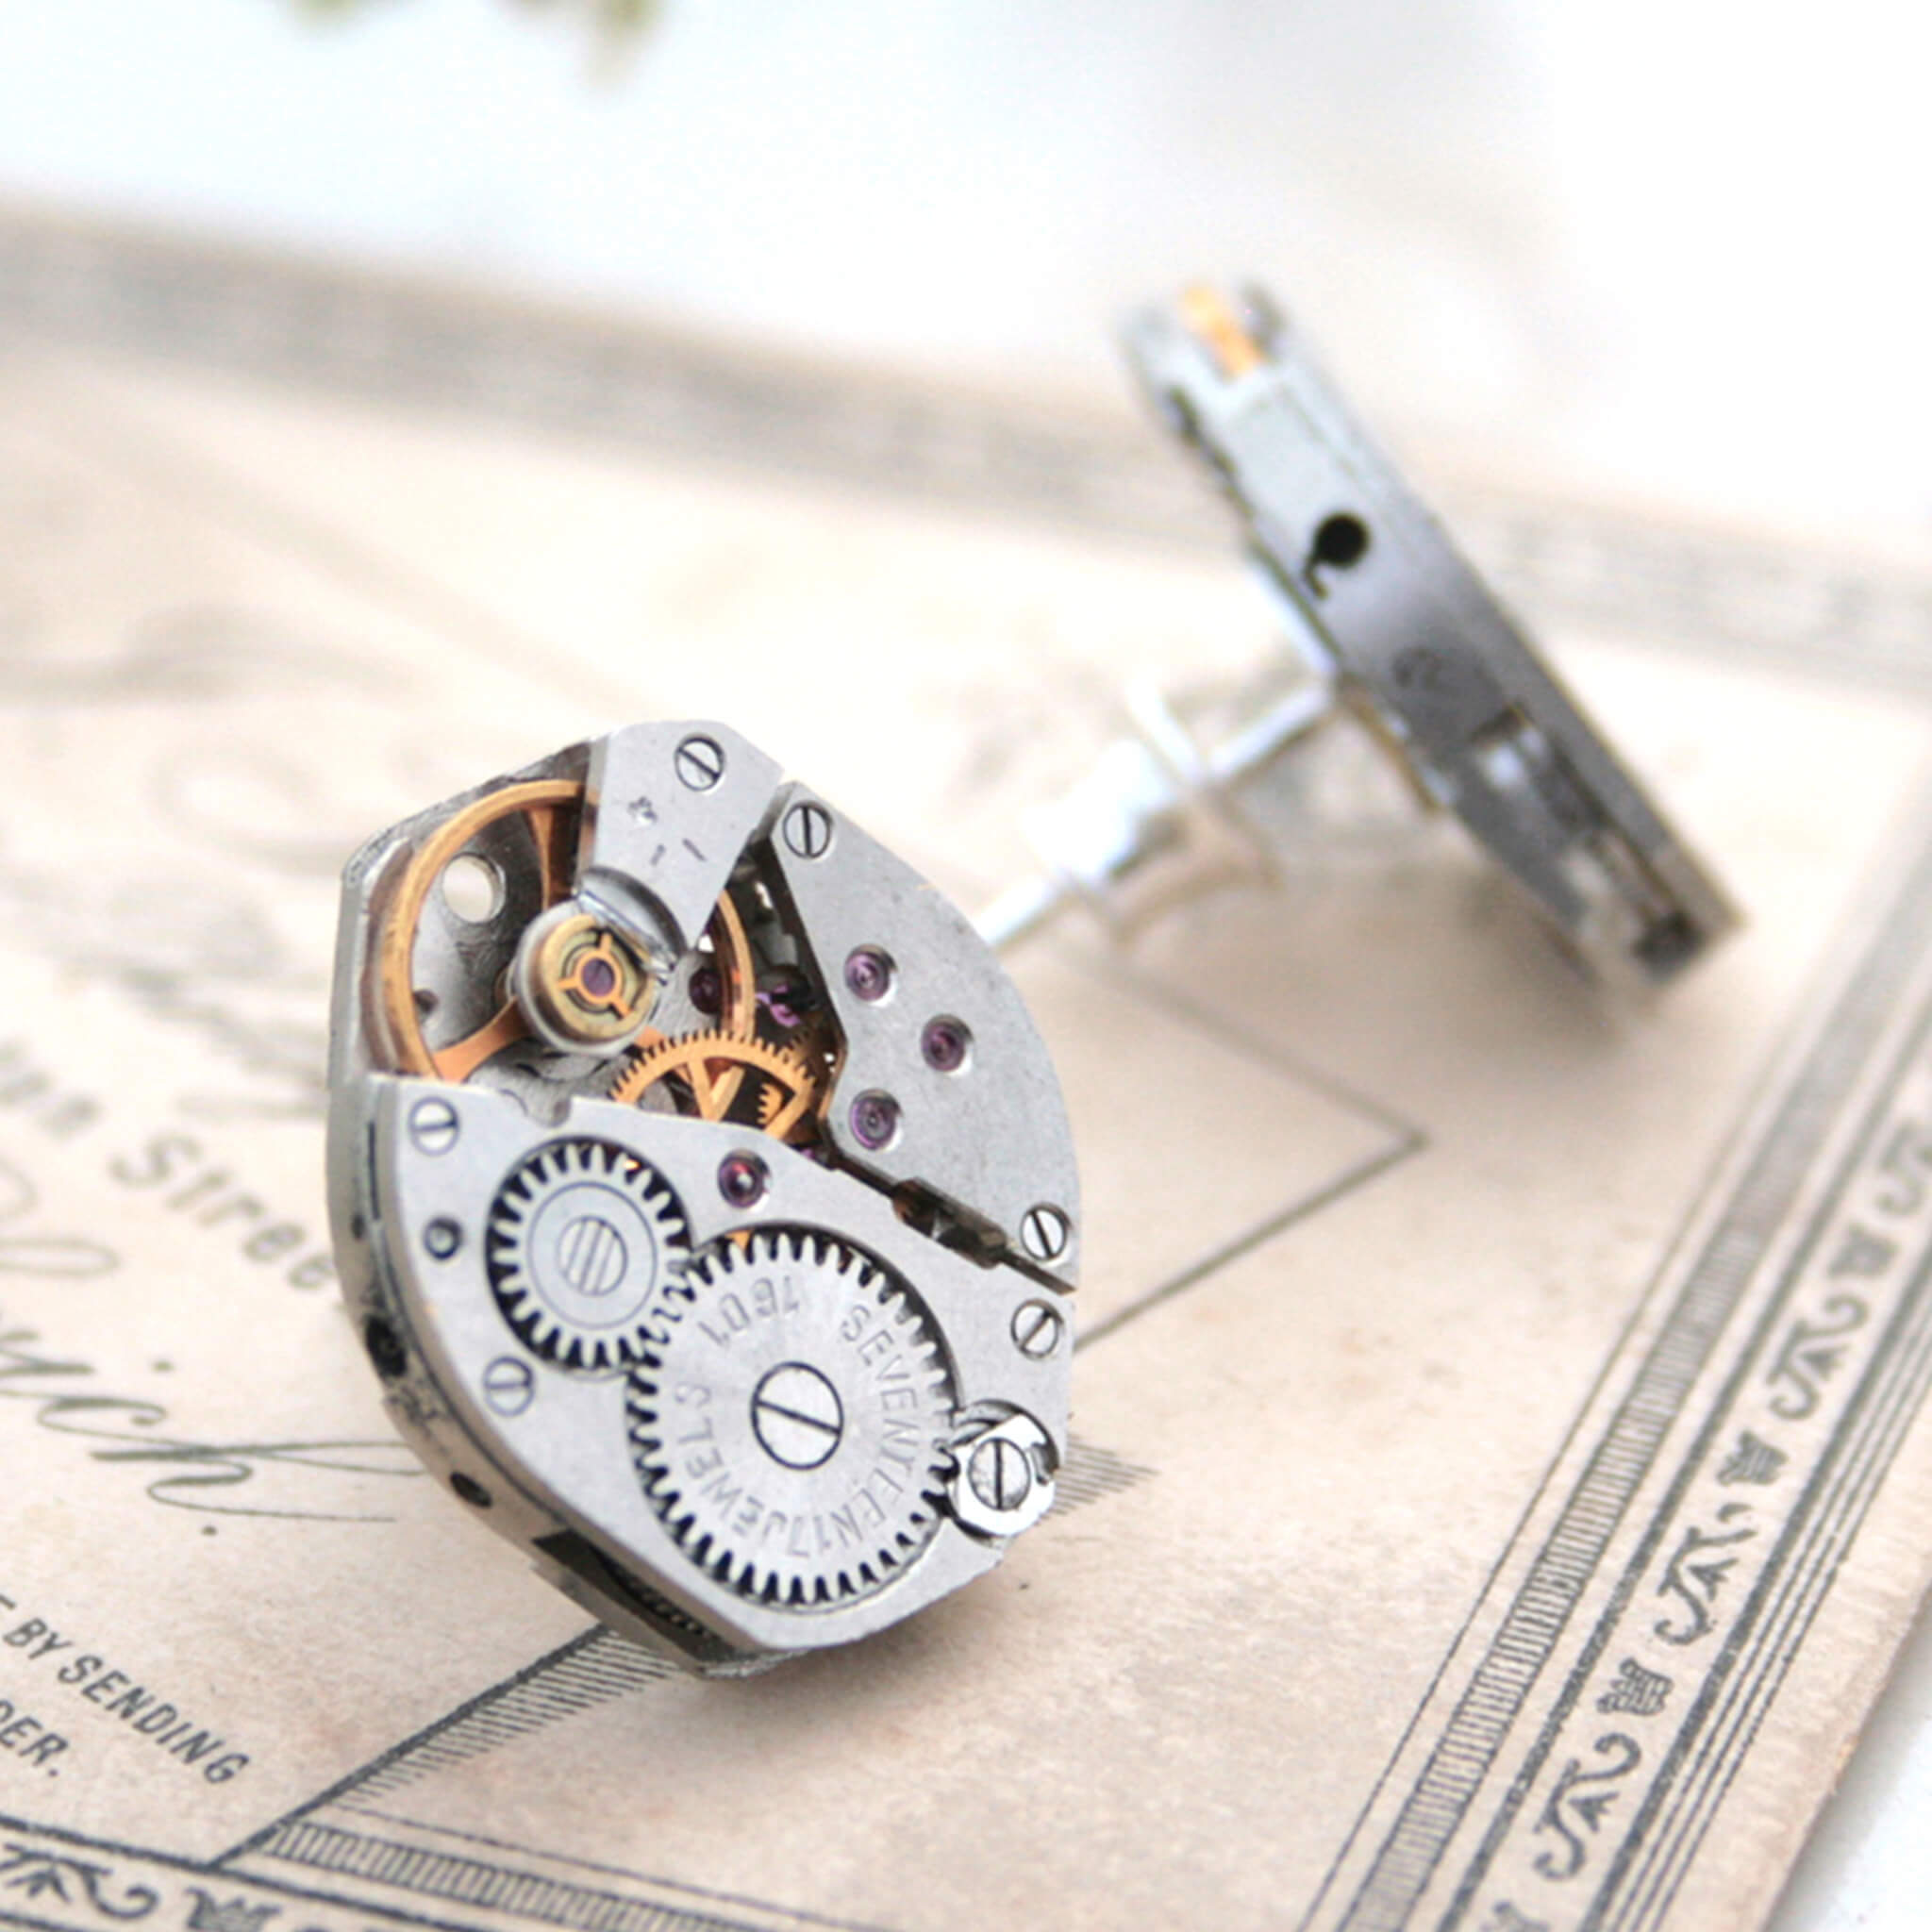 watch movements turned into stud earrings lying on old papers